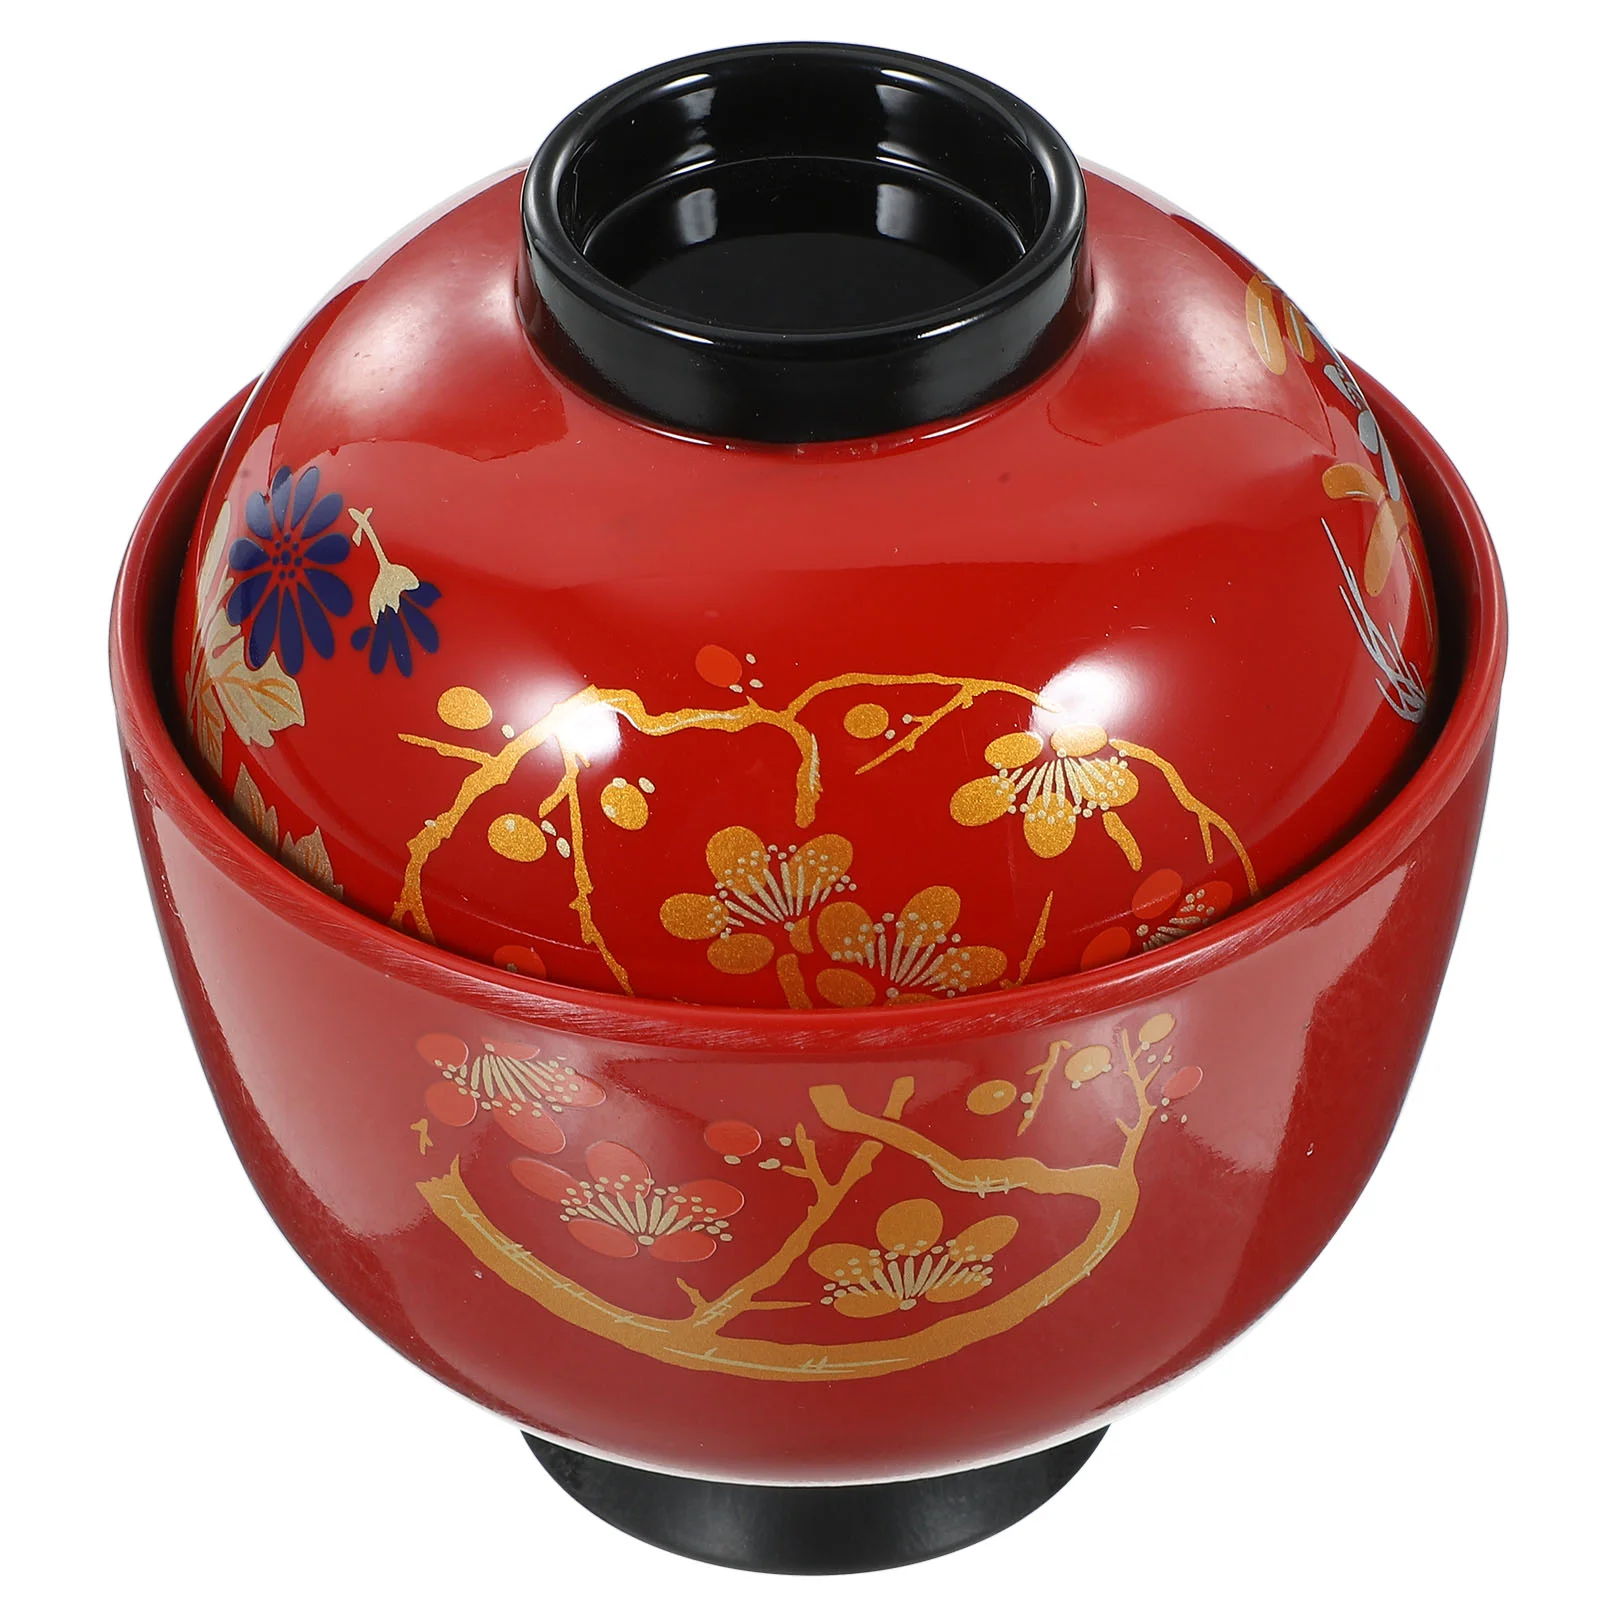 

Container Lid Lidded Soup Serving Bowl Rice Bowls Japanese Household Food Melamine Sushi